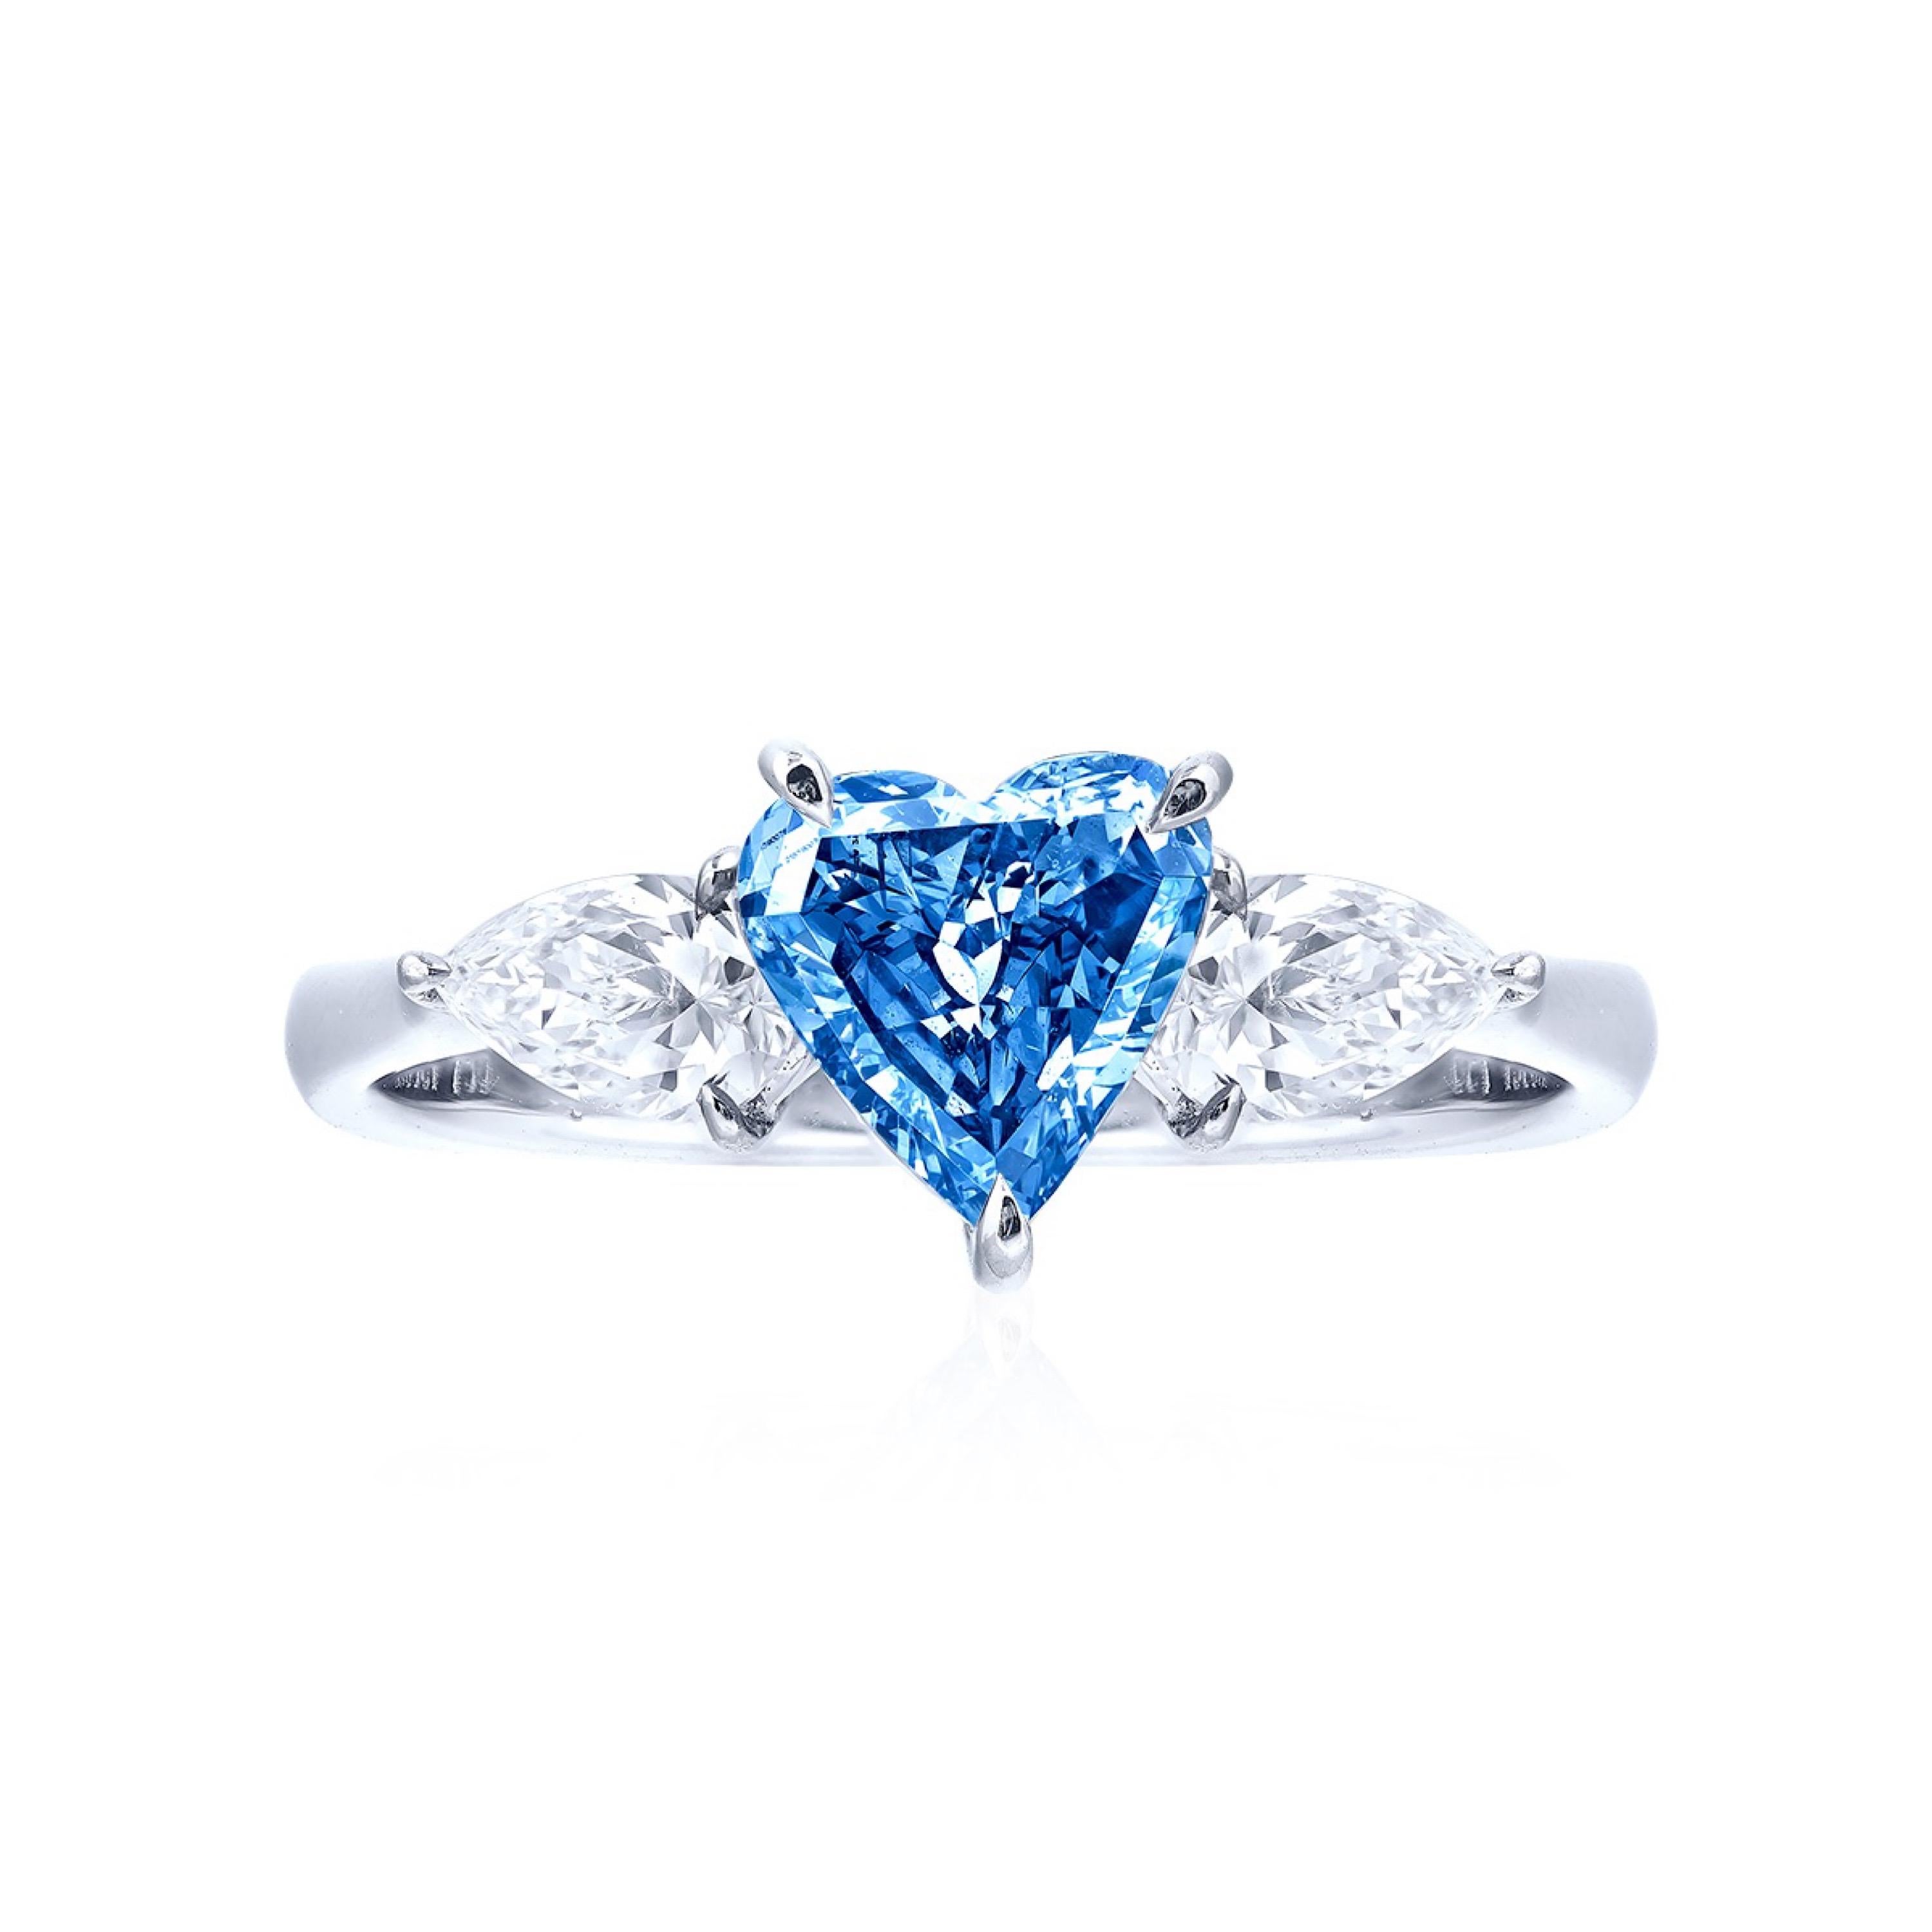 Center Stone: Gia certified natural  1.00 carat Fancy Vivid Blue Heart 
Matching setting: 2 fancy lace white diamonds, a total of about 0.60 carats, 
From the Museum vault at Emilio Jewelry, Located On New York’s Iconic Fifth Avenue:
If you have